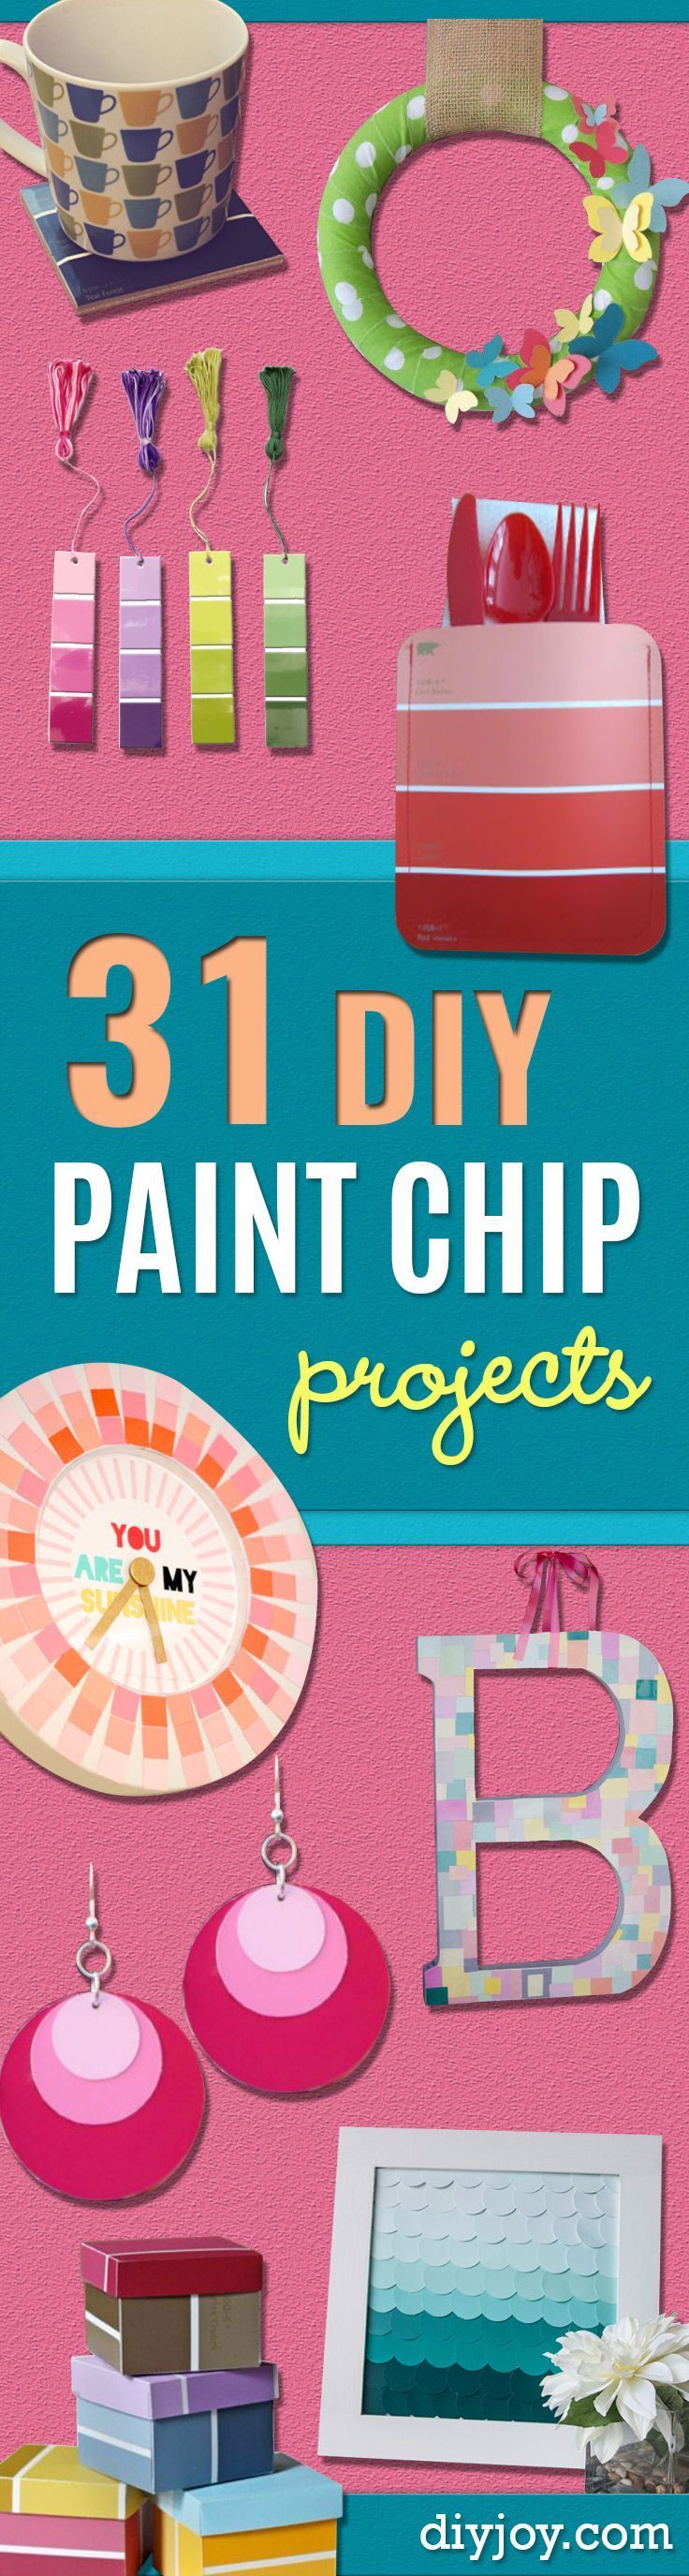 DIY Projects Made With Paint Chips – Best Creative Crafts, Easy DYI Projects You Can Make With Paint Chips – Cool Paint Chip